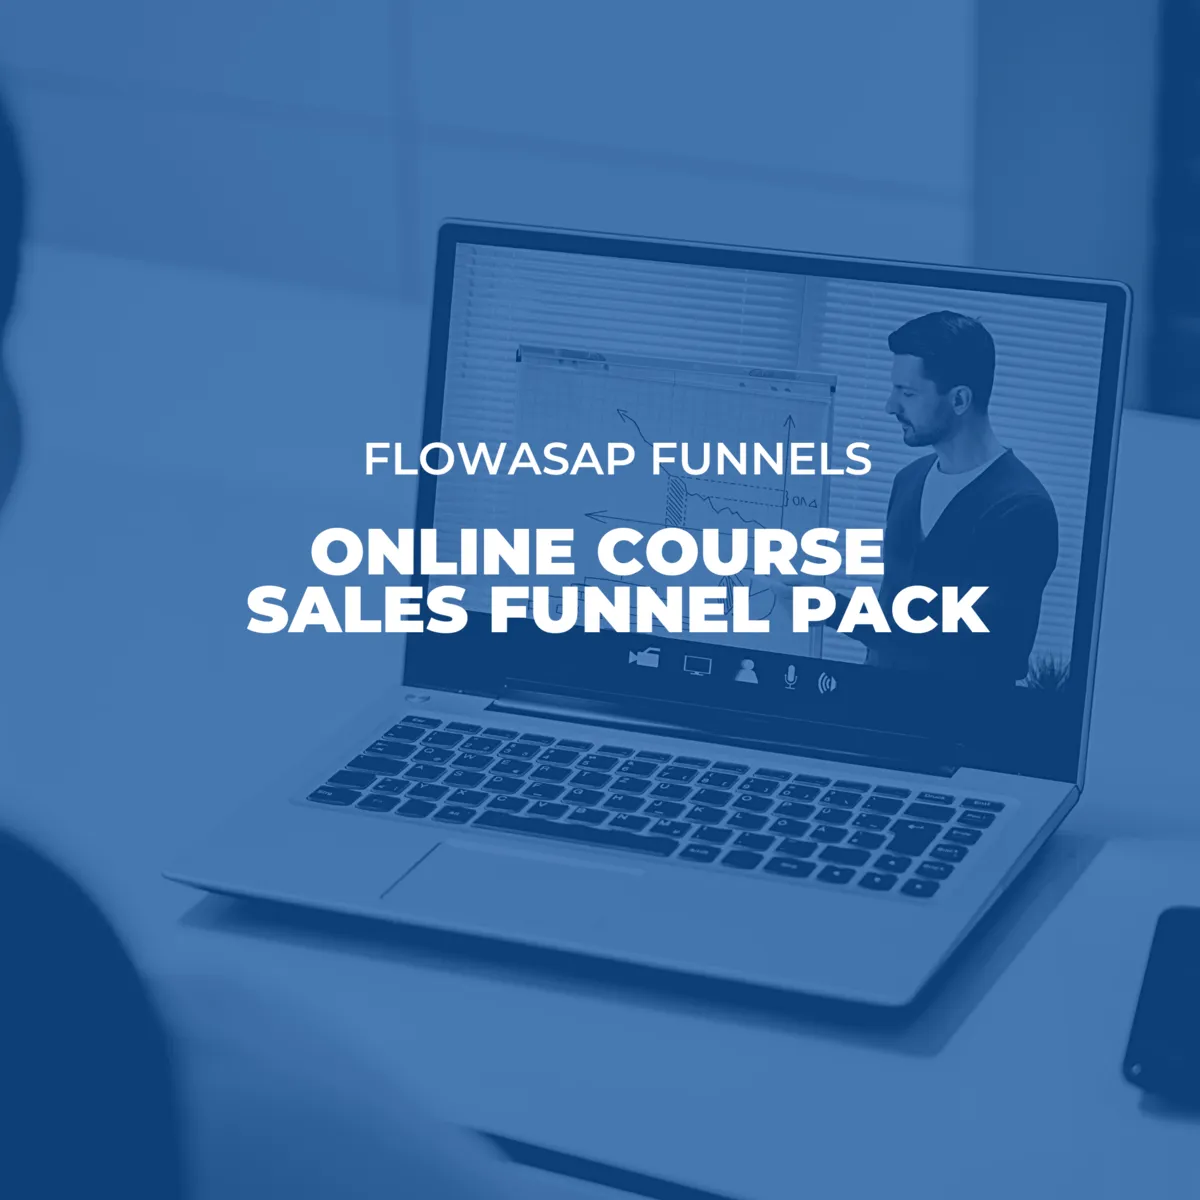 ONLINE COURSE FUNNEL PACK